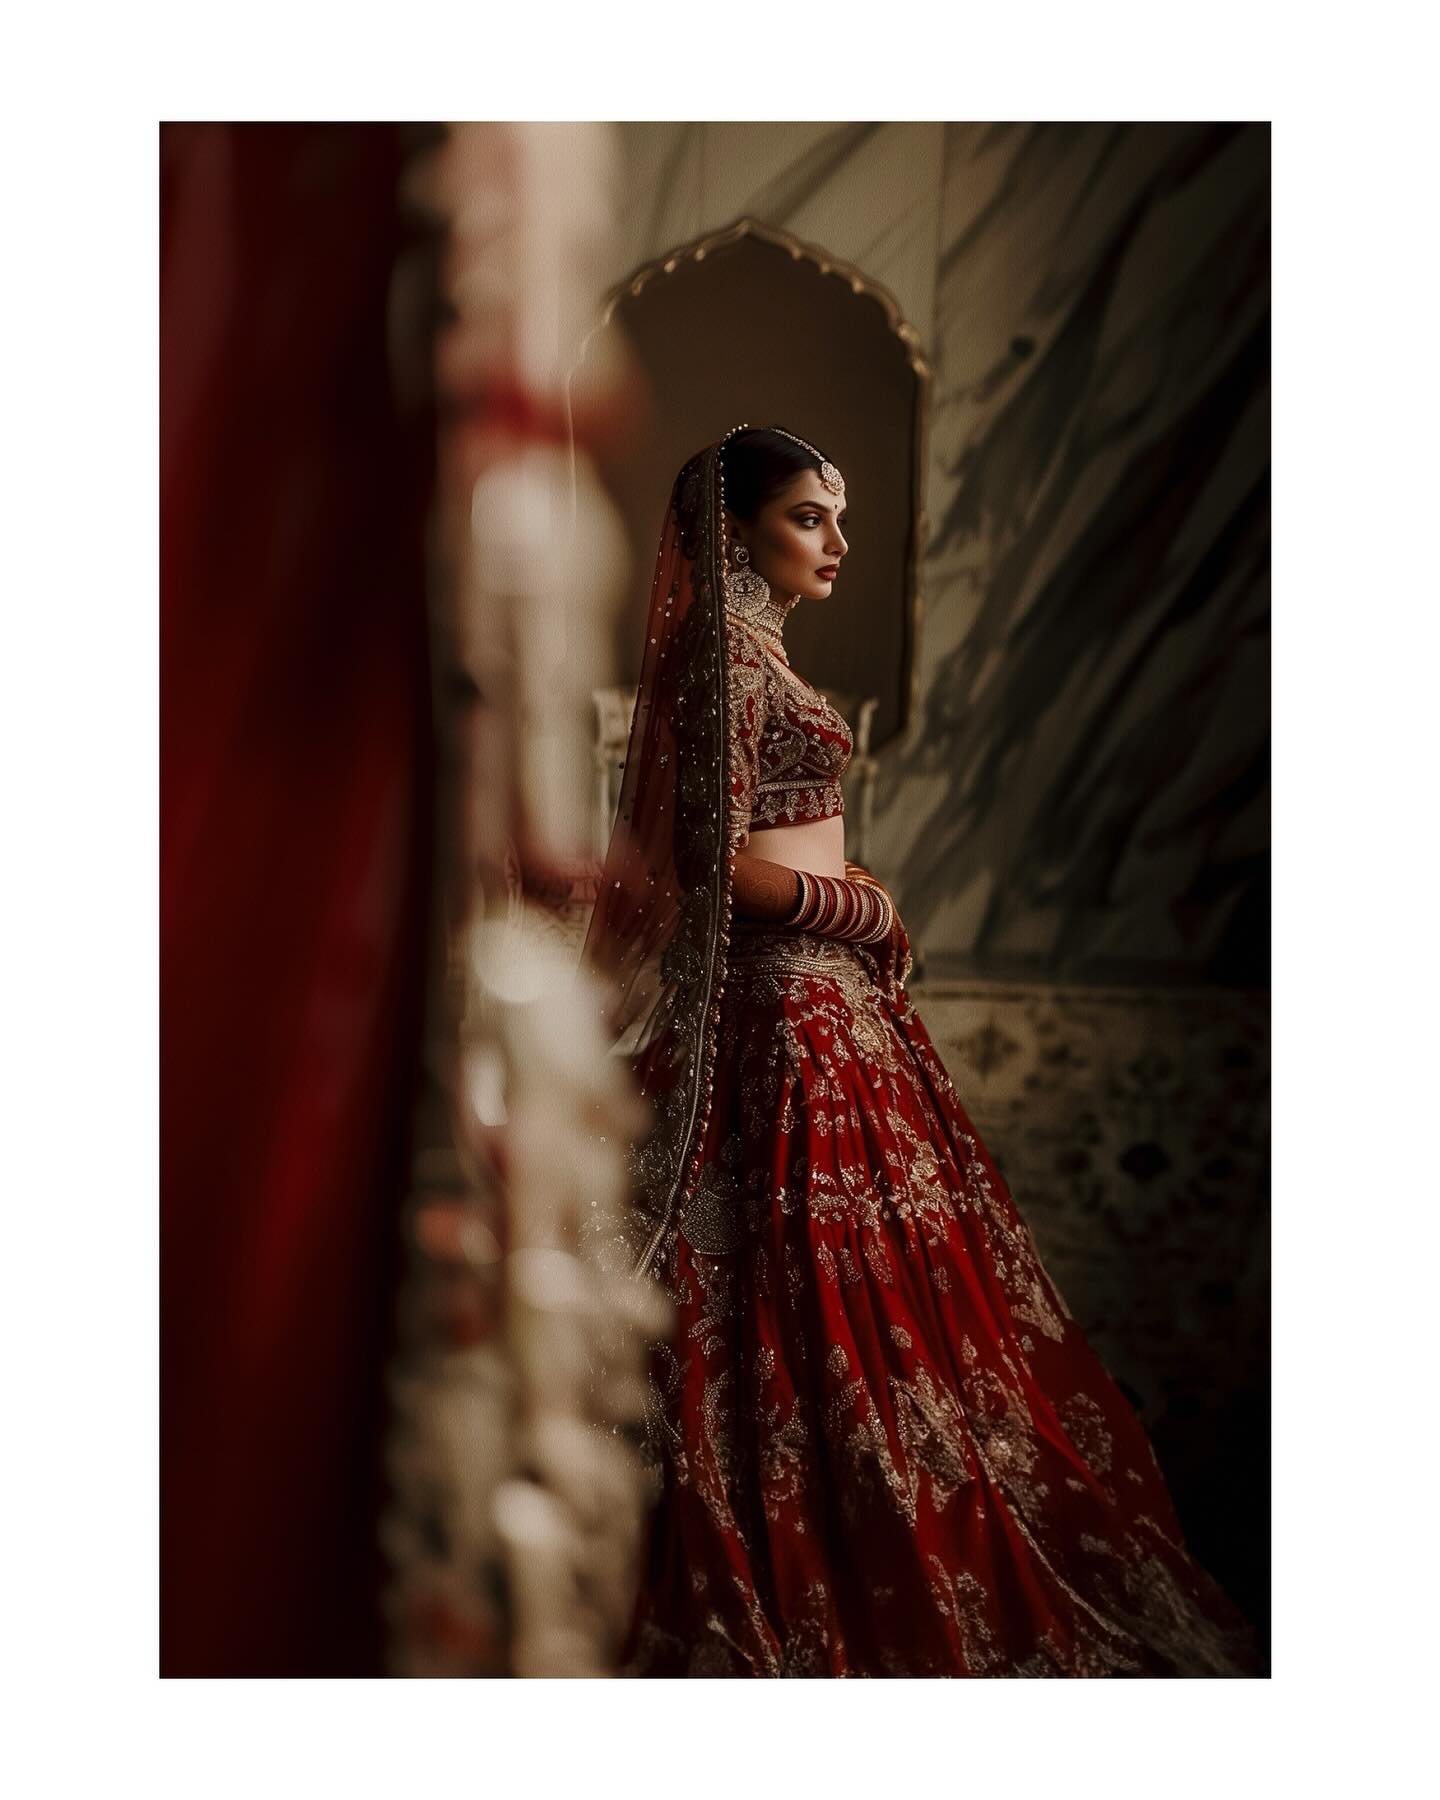 //Currently// I&rsquo;ve photographed so many desi weddings and my heart still skips a beat when I see my brides like Alina all glammed up for their big days. 🥹😍 This wedding was nothing short of magical and I can&rsquo;t wait to share more!! 🌹

&